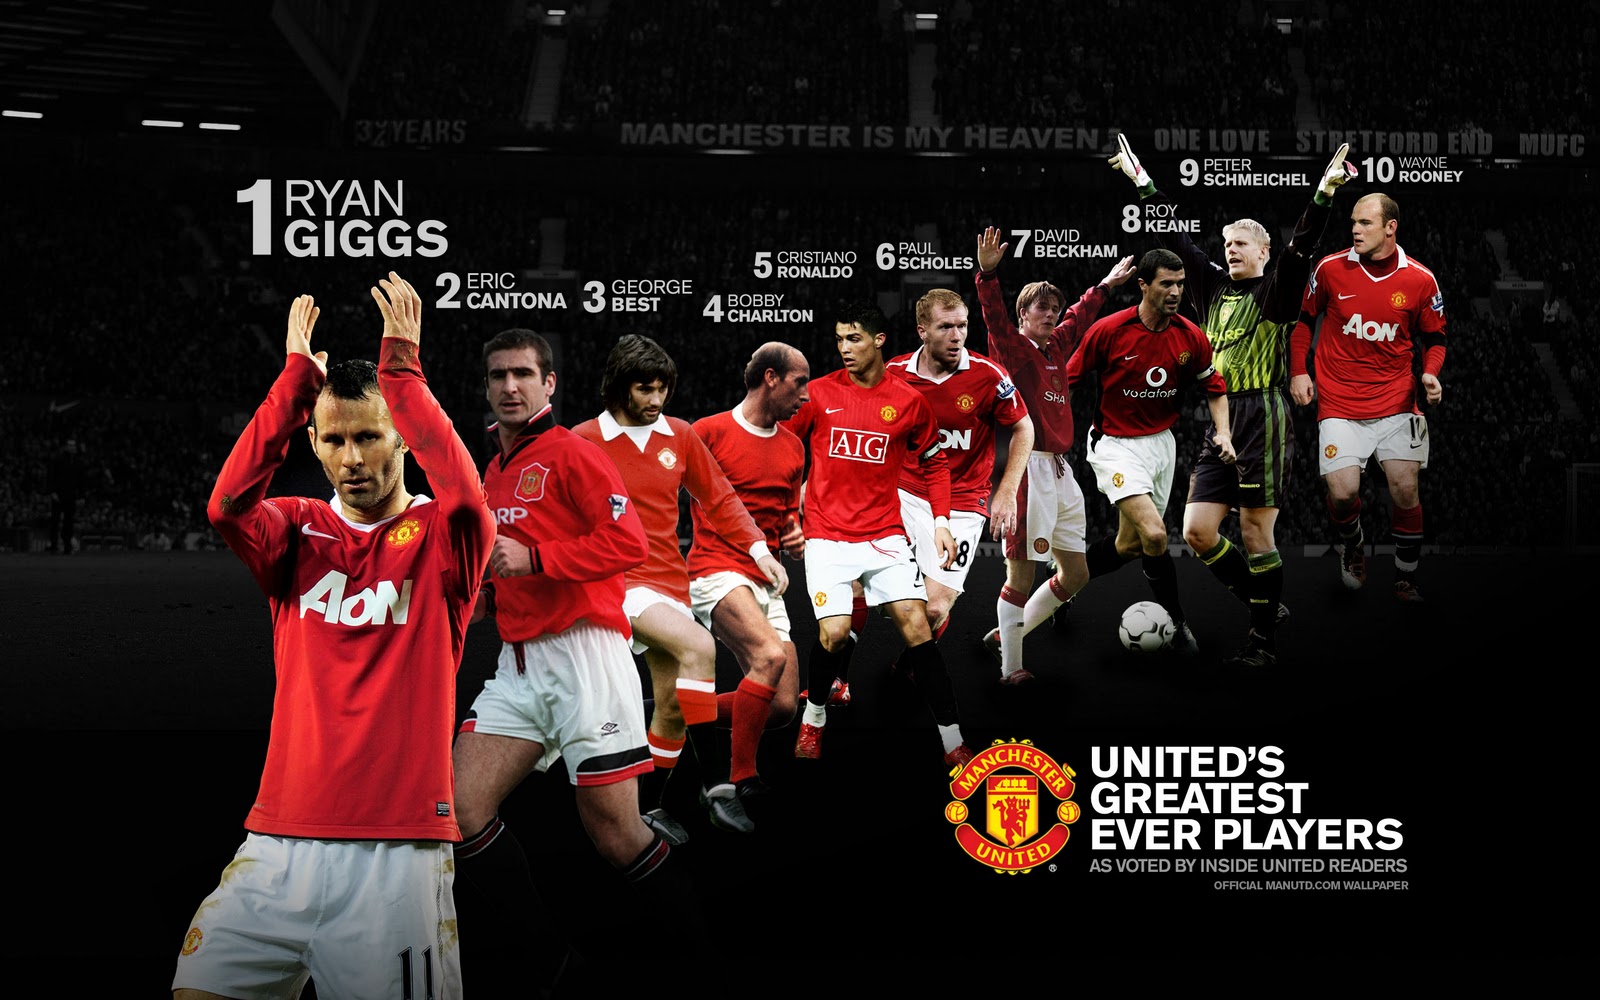 All Wallpapers Manchester United Wallpapers hd 2013